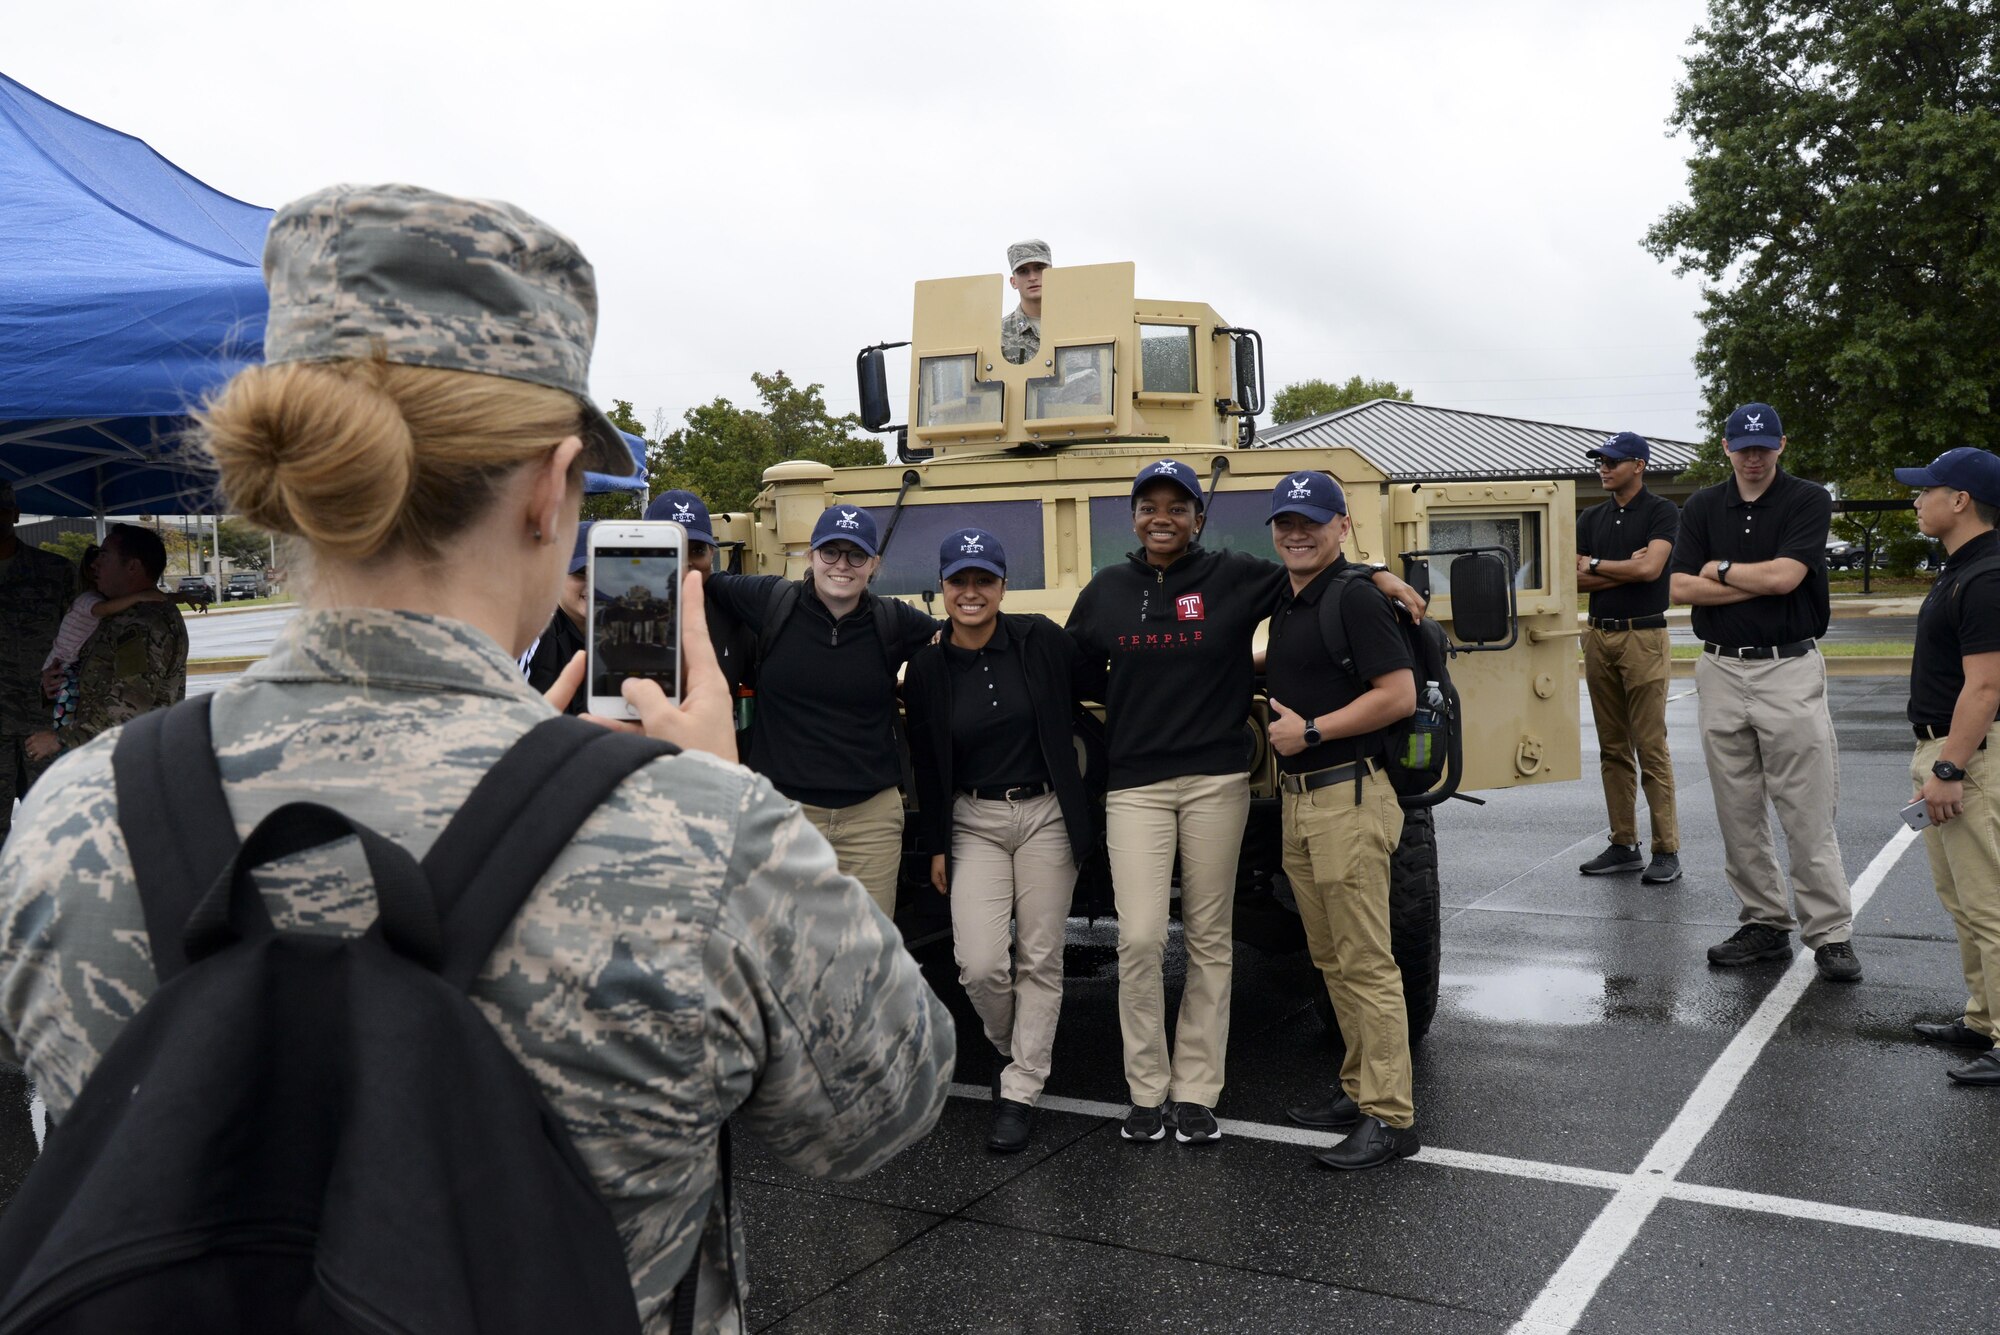 A group of Junior ROTC cadets pose for a group photo in front of a 436th Civil Engineer Squadron explosive ordnance disposal vehicle Oct. 11, 2017, during a Pathways to Blue tour at Dover Air Force Base, Del. In addition to viewing the 436th CES EOD and firefighting vehicles and equipment, cadets also visited the 436th Operations Support Squadron air traffic control tower, the 436th Maintenance Squadron’s C-5M Isochronal Inspection Dock and the 436th Aerial Port Squadron. (U.S. Air Force photo by Staff Sgt. Aaron J. Jenne)